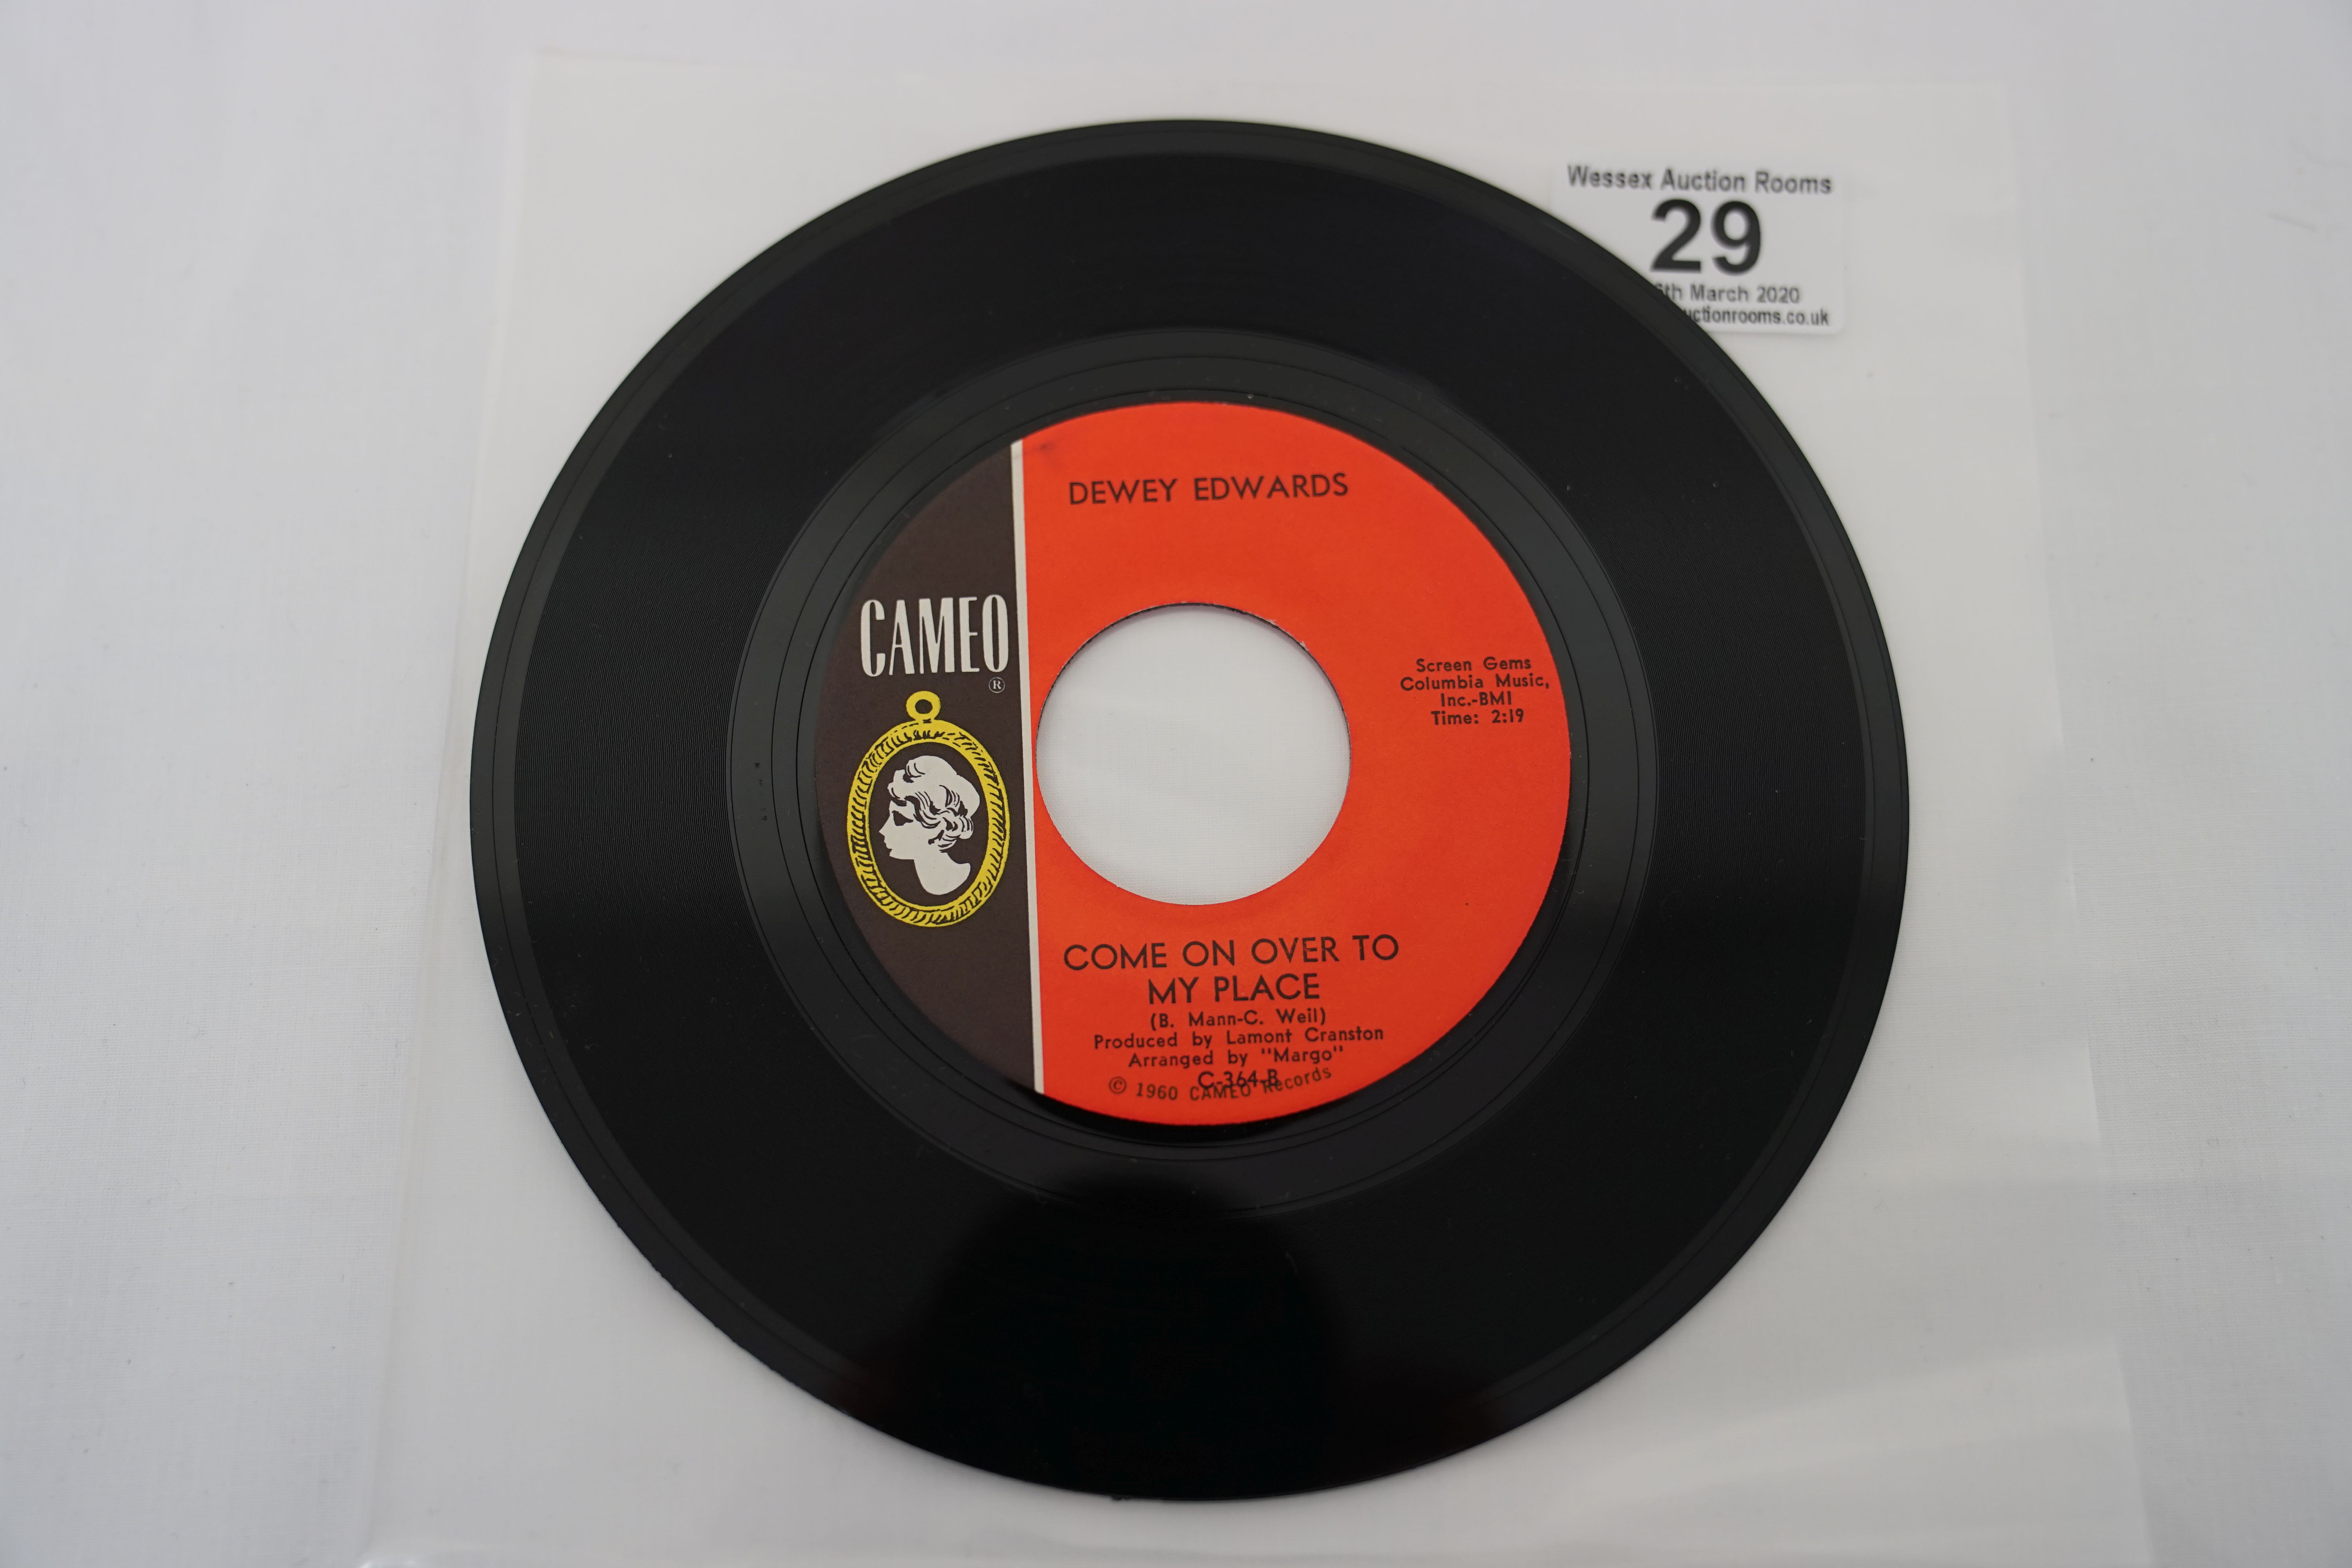 Vinyl - 3 rare Original US 1st pressing Northern Soul single on the Cameo Parkway label. The Sweet - Image 9 of 17